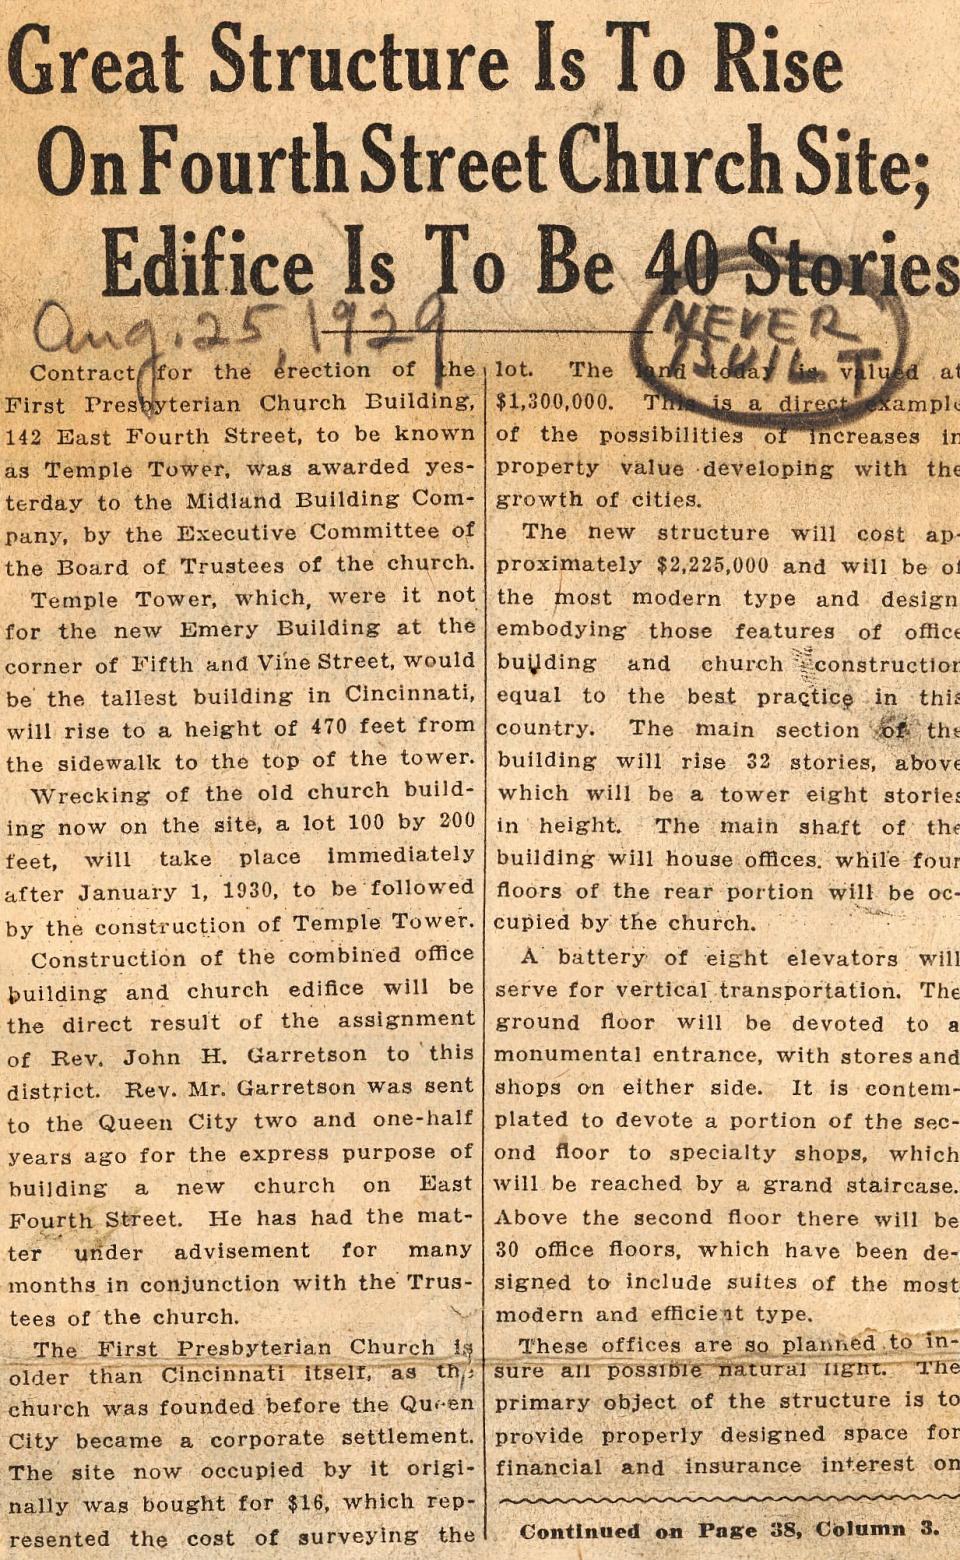 The Cincinnati Enquirer article from Aug. 29, 1929, announced Temple Tower, a proposed skyscraper to replace the First Presbyterian Church on Fourth Street. The clipping in The Enquirer archive included the note, “Never built.”